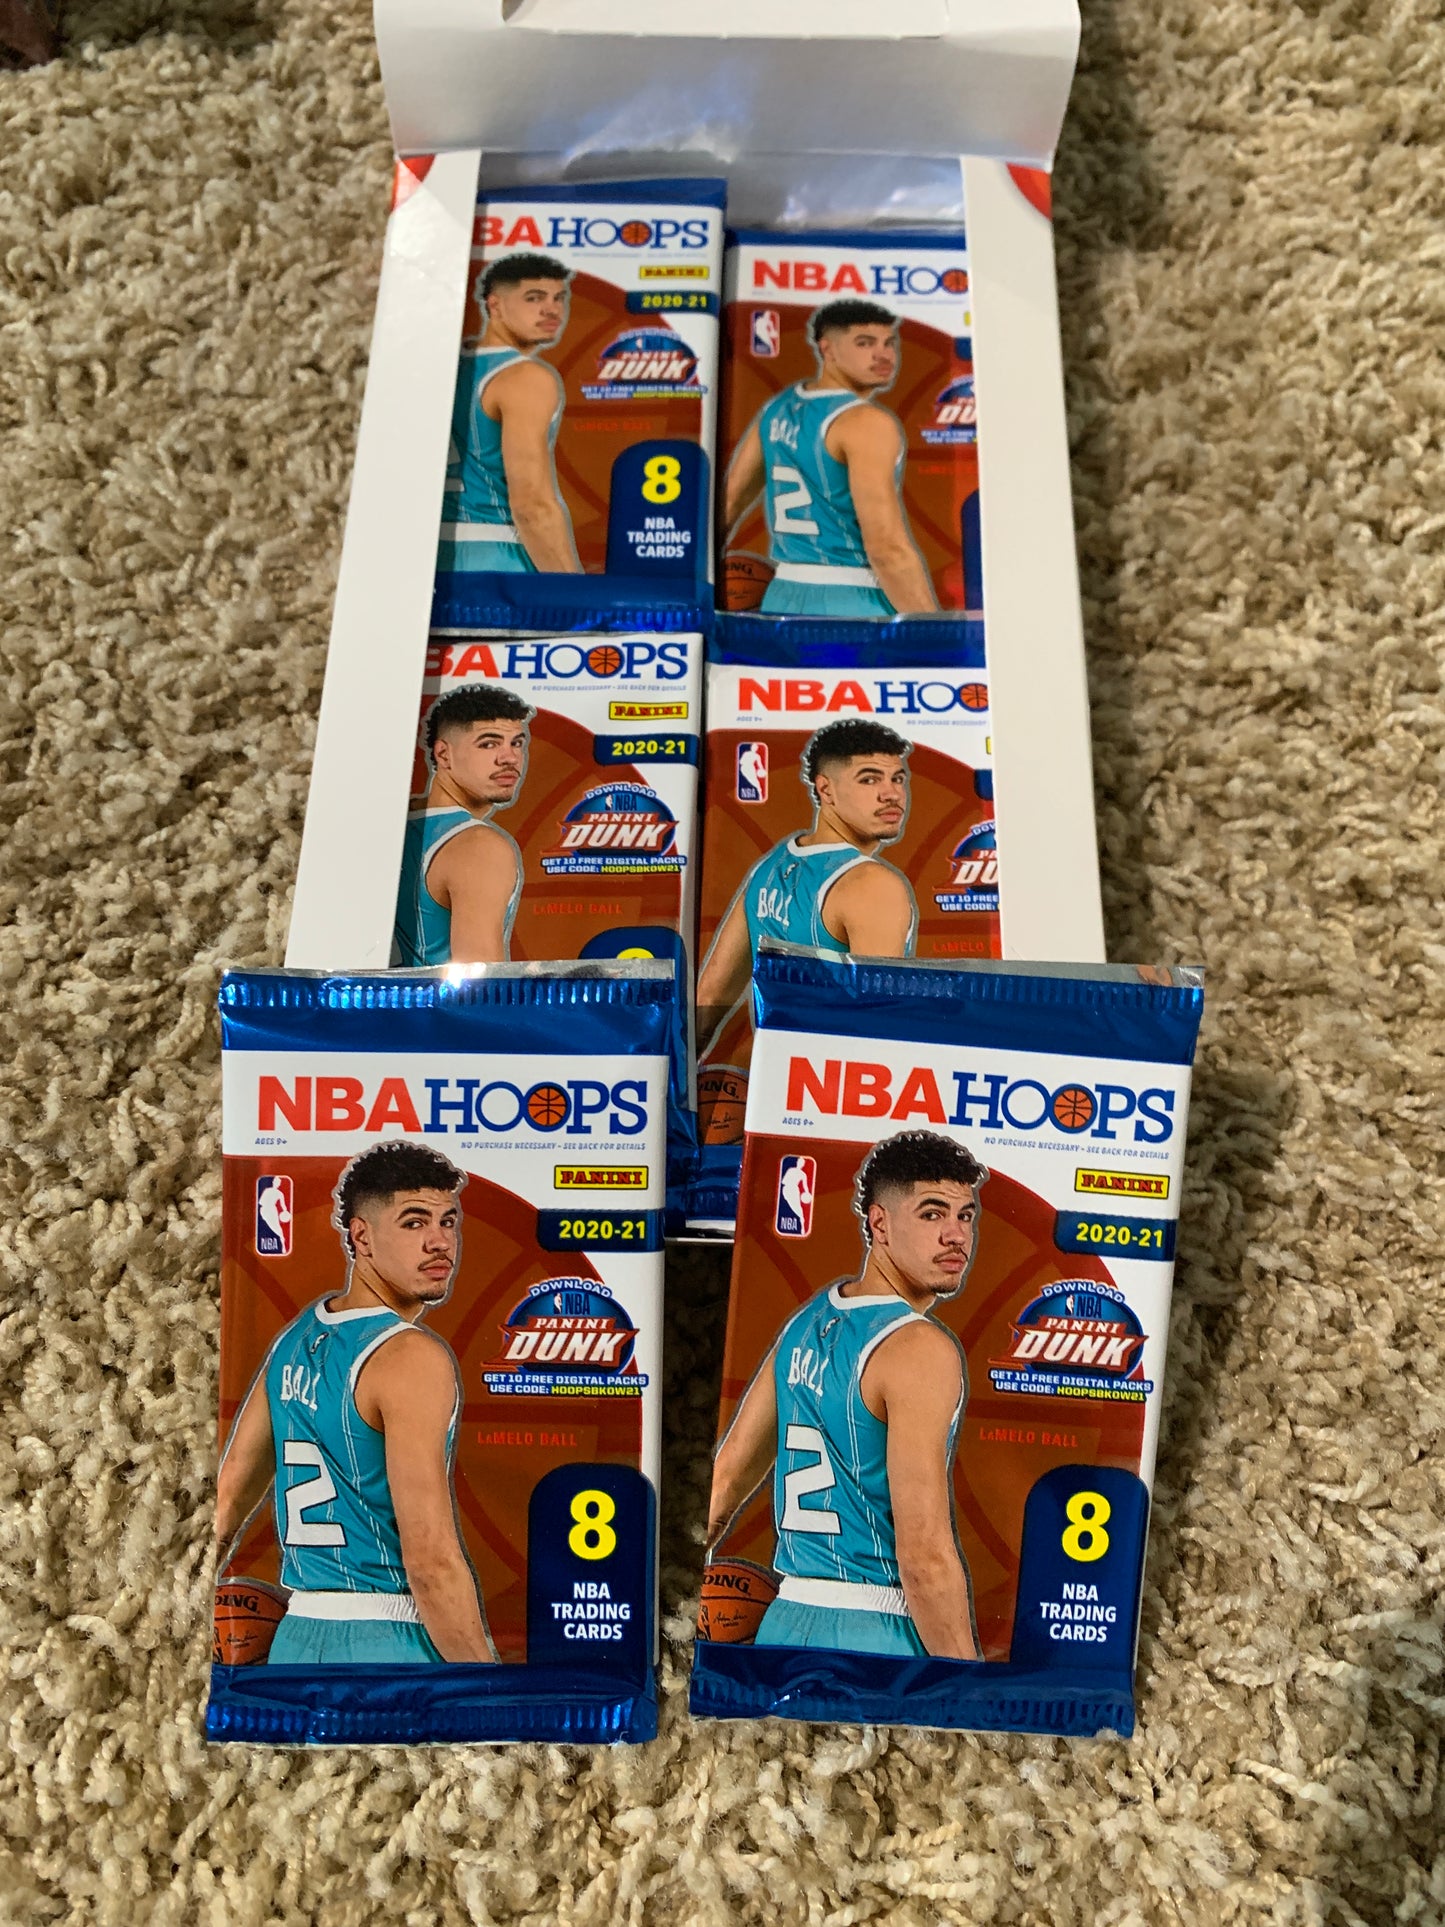 2020-21 Panini Basketball Hoops Single Pack. possible auto pull? 2 per box on avg. LeMelo Ball Rookie 1 insert or parallel per pack